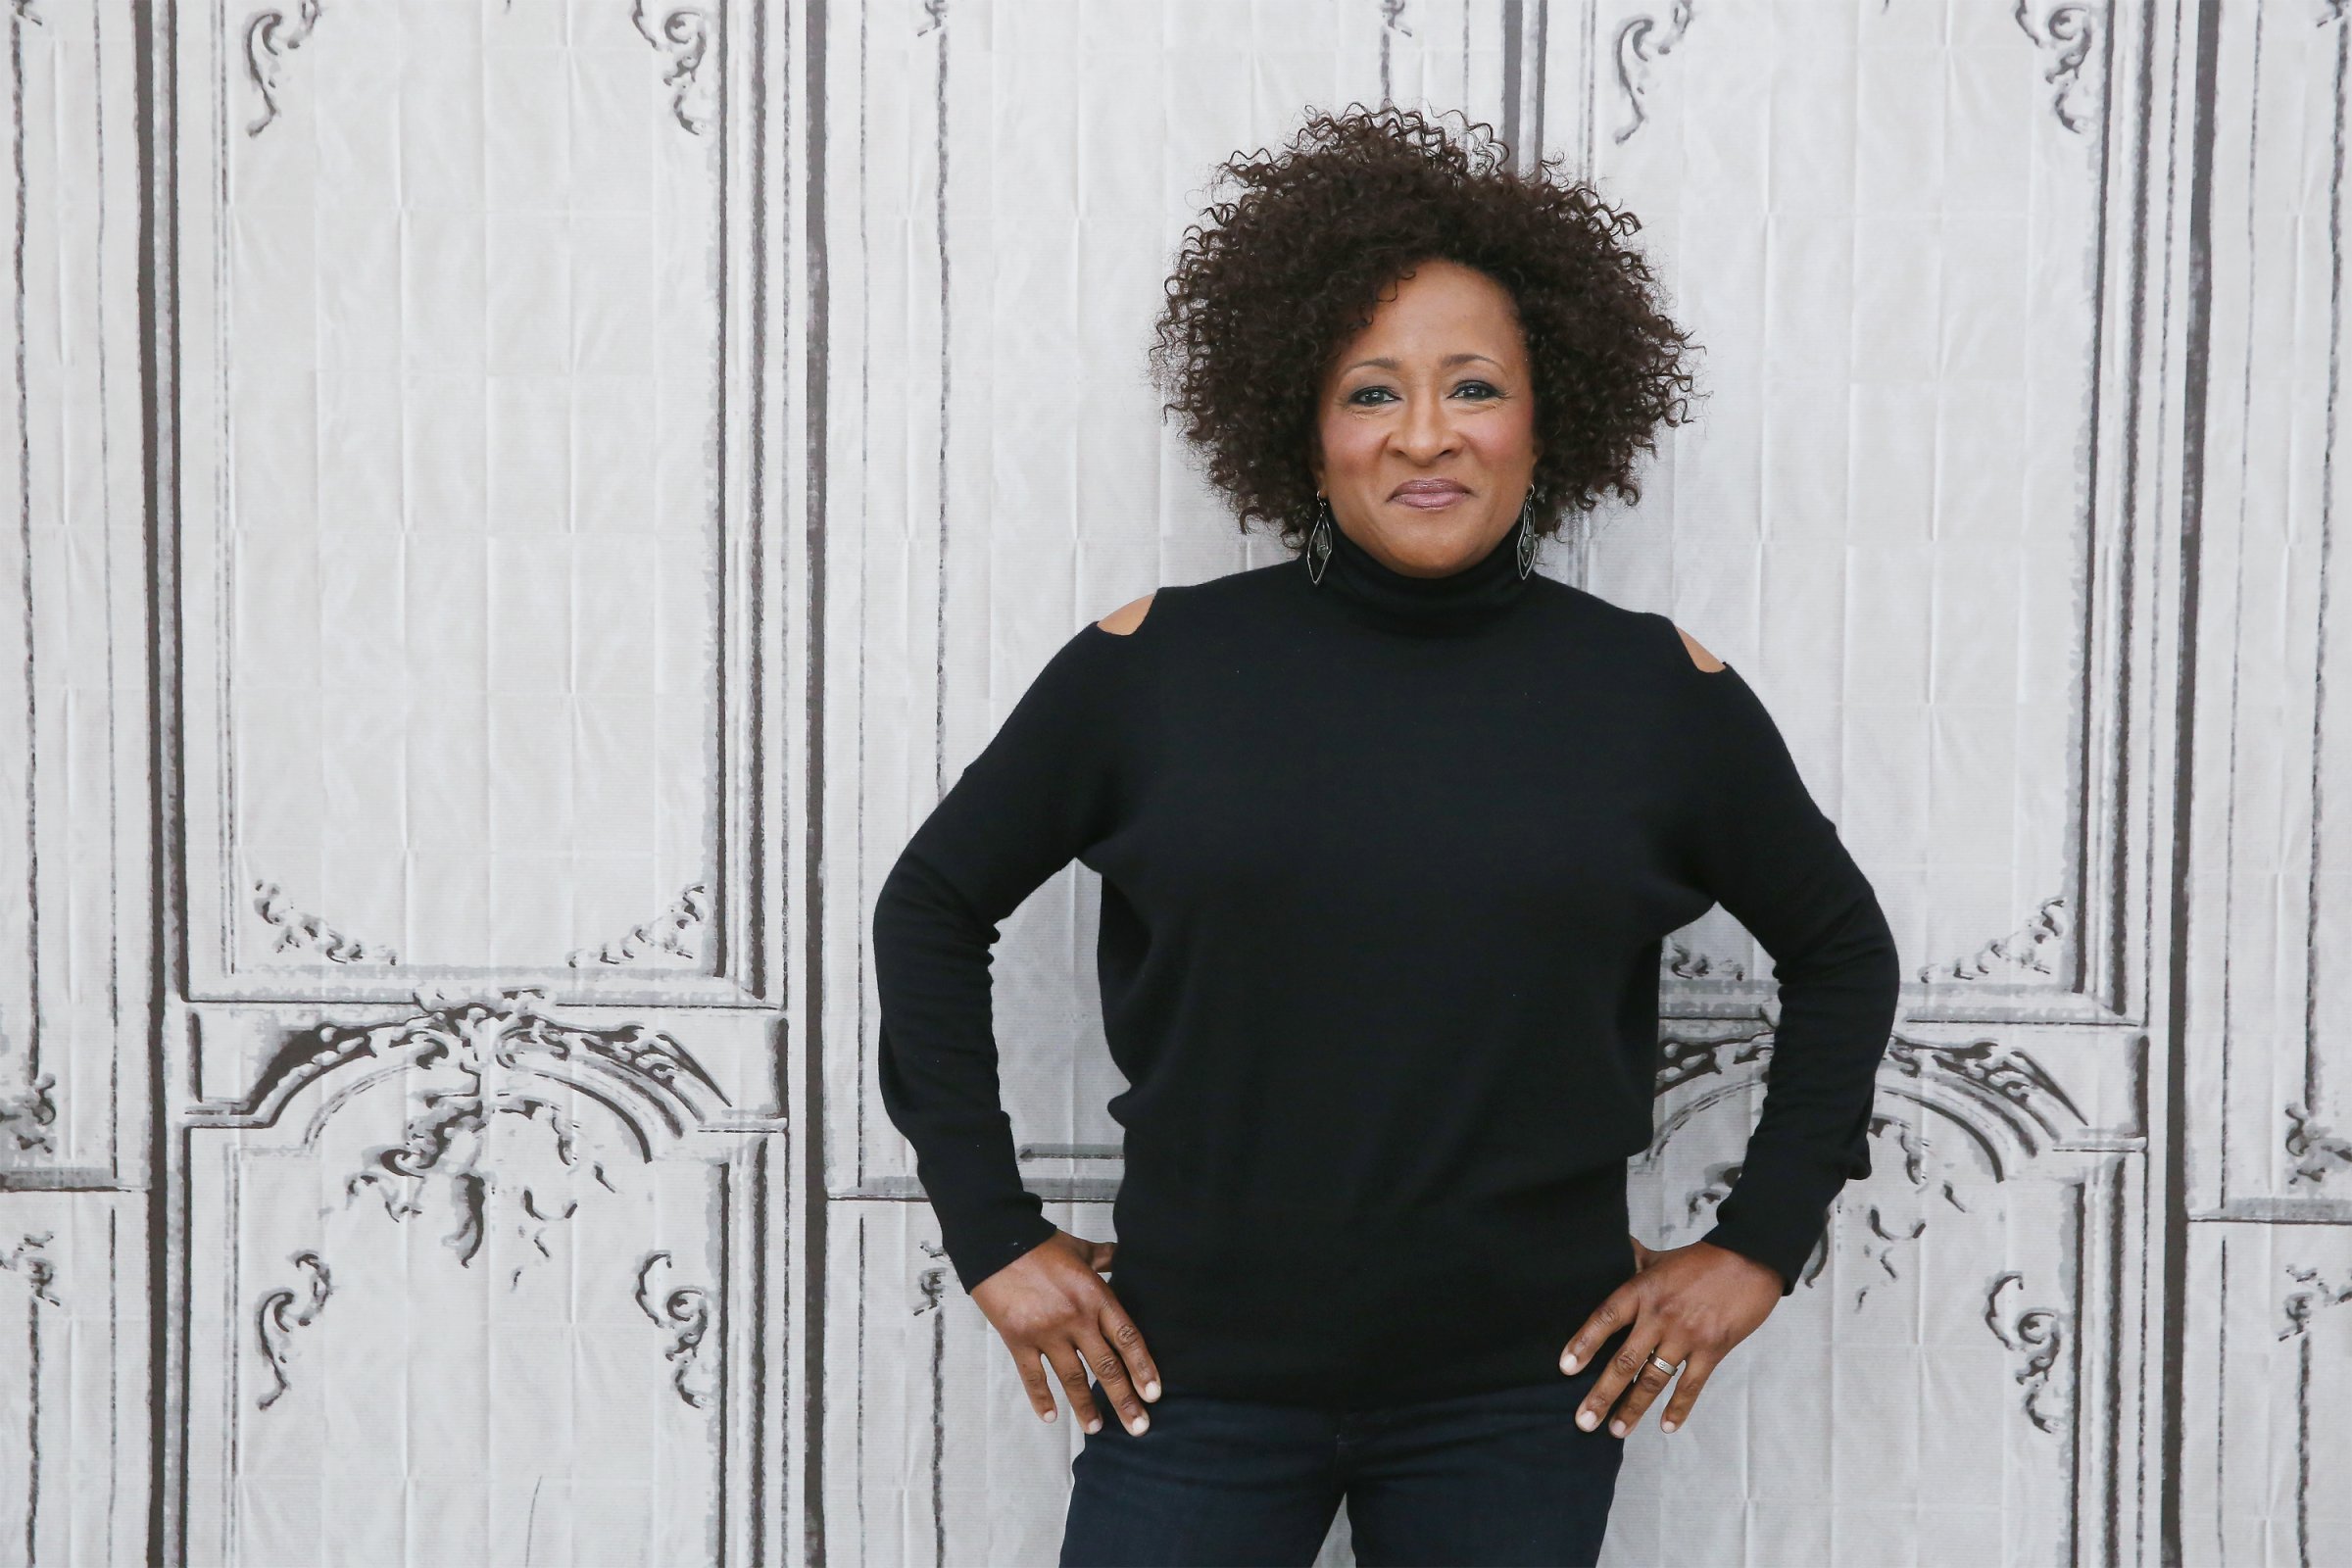 The Build Series presents Wanda Sykes to discuss her new project "What Happened...Ms. Sykes" at AOL HQ on October 19, 2016 in New York City.